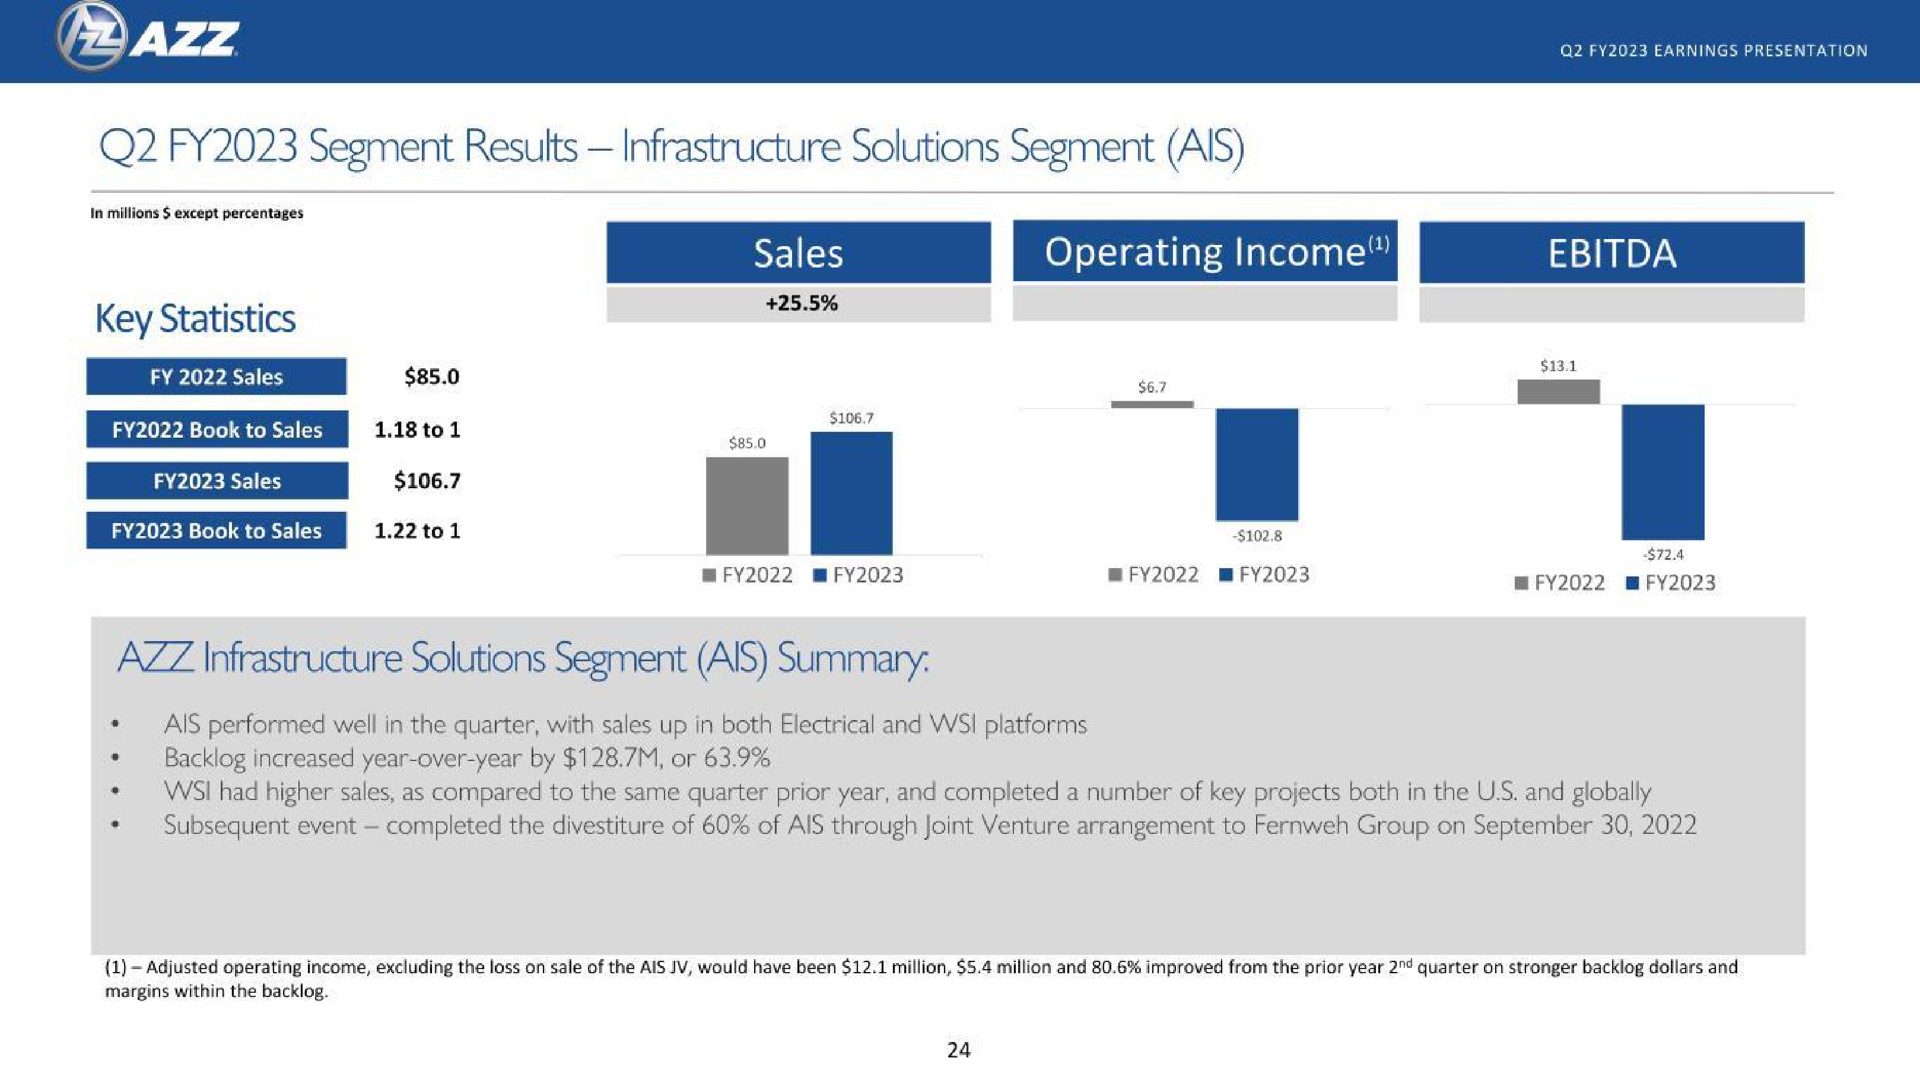 segment results infrastructure solutions segment ais key statistics operating income infrastructure solutions segment ais summary | AZZ